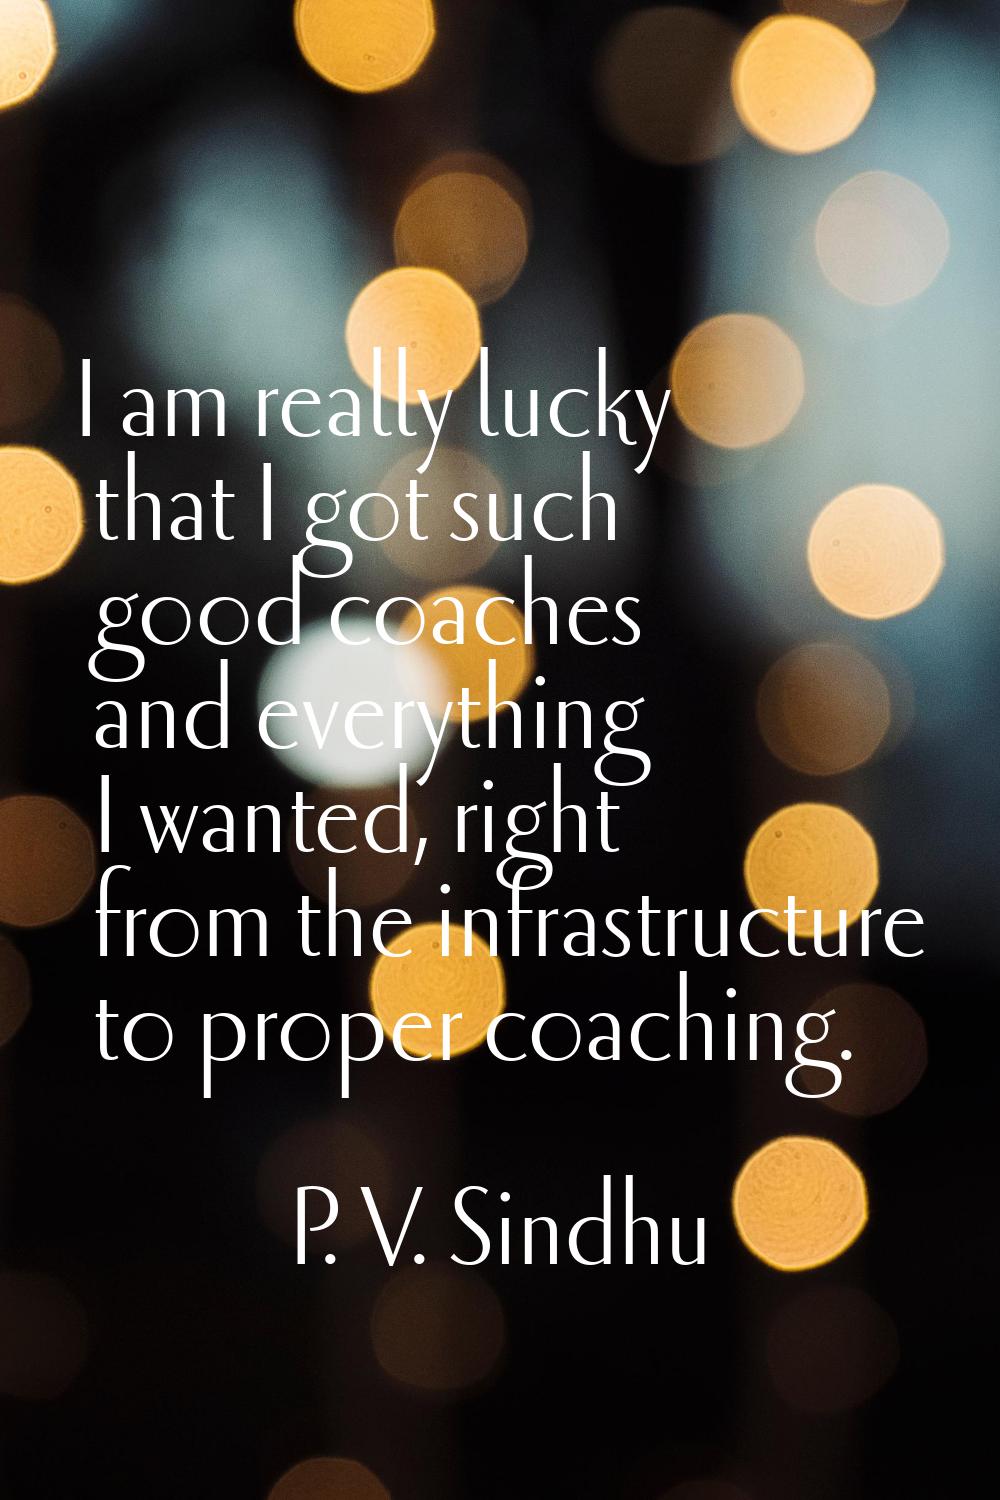 I am really lucky that I got such good coaches and everything I wanted, right from the infrastructu